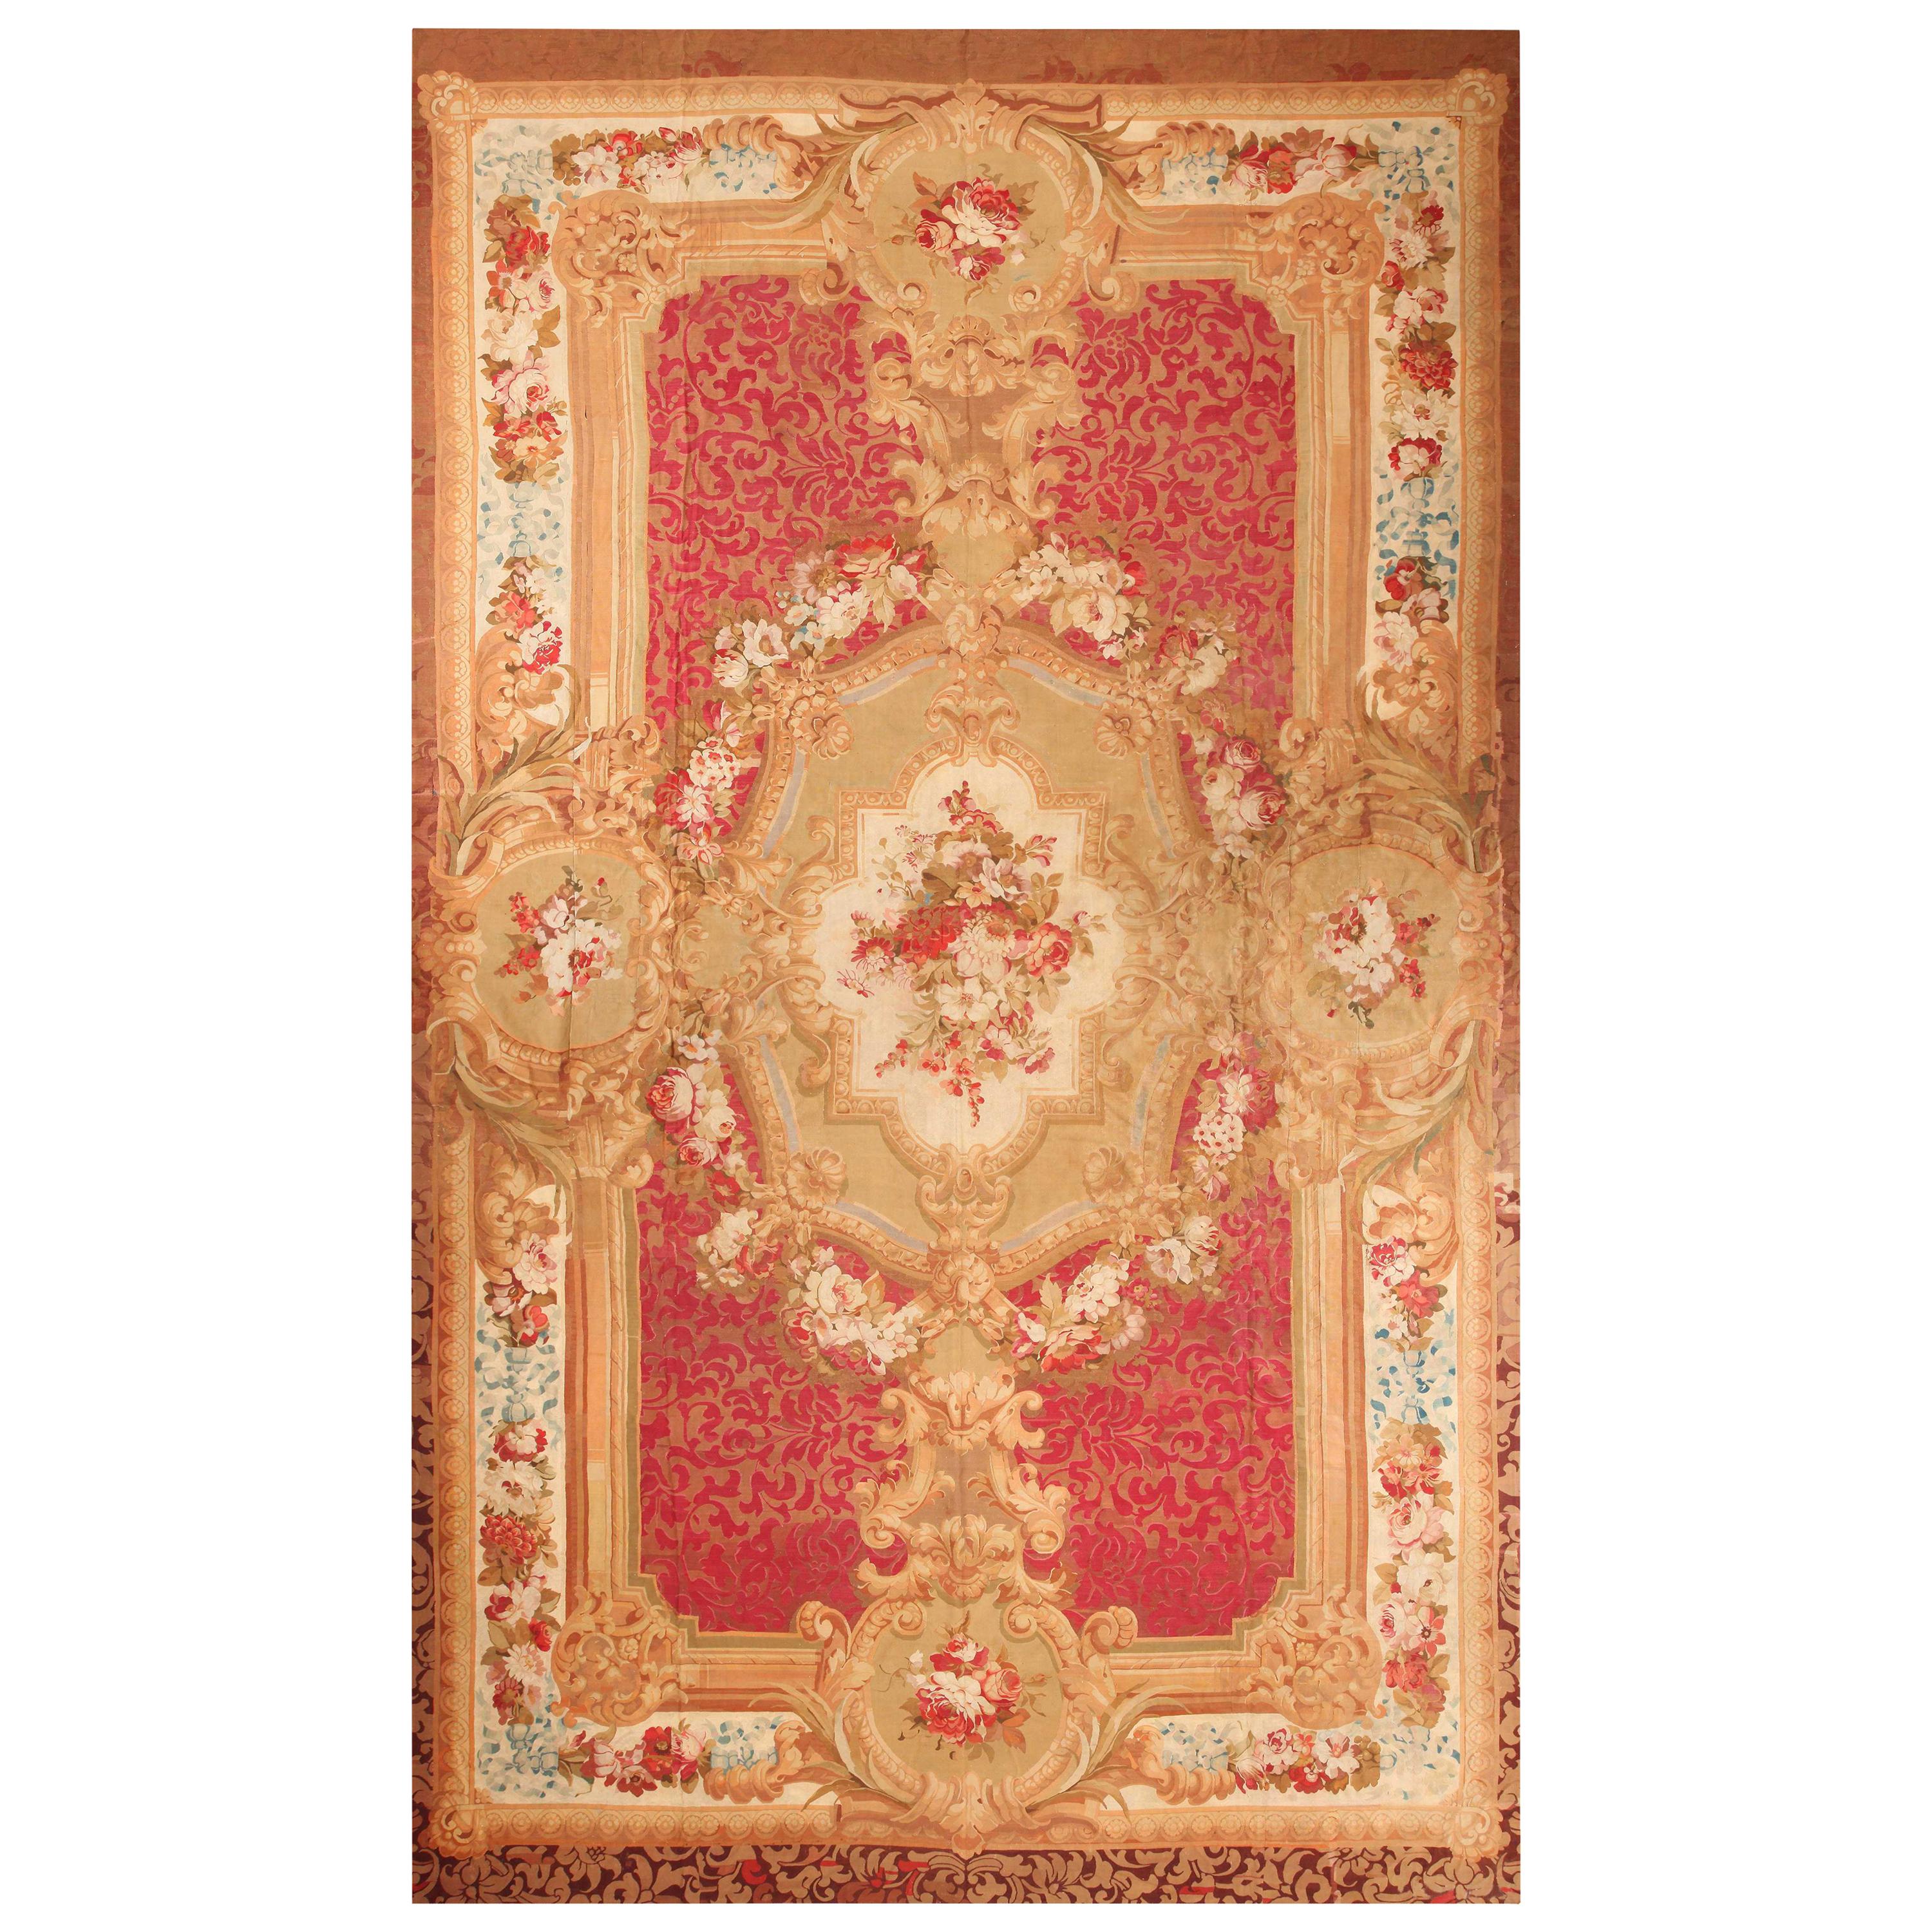 Antique French Aubusson Rug. Size: 16 ft x 26 ft 4 in